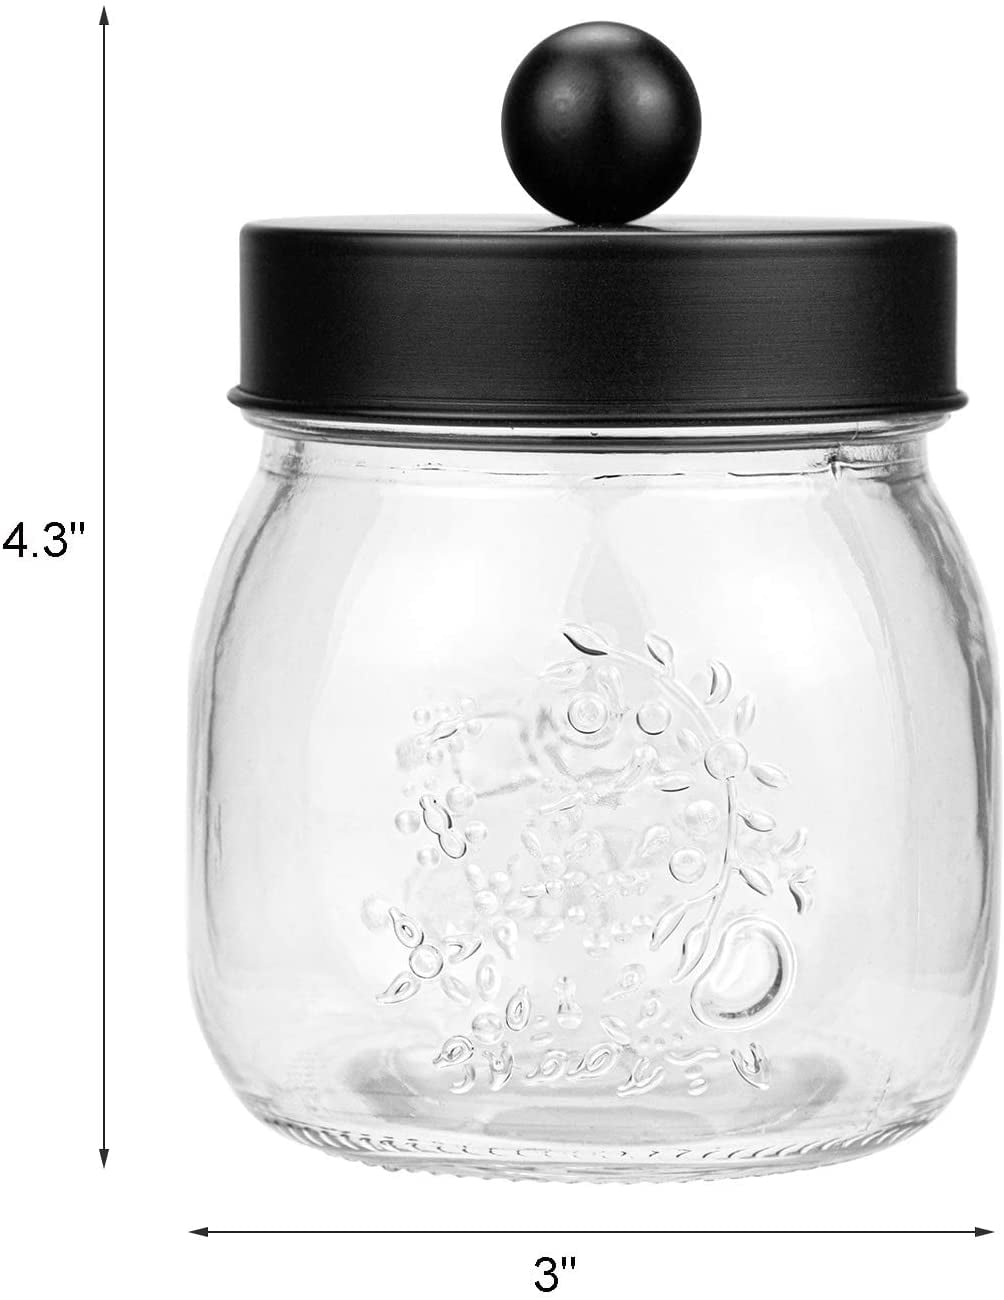 2-Pack Bath Salts Elwiya Bathroom Apothecary Jars Set Farmhouse Decor Qtip Dispenser Holder Glass Ball/Black Rounds Rustic Vanity Organizer with Stainless Steel Lids for Cotton Swabs 